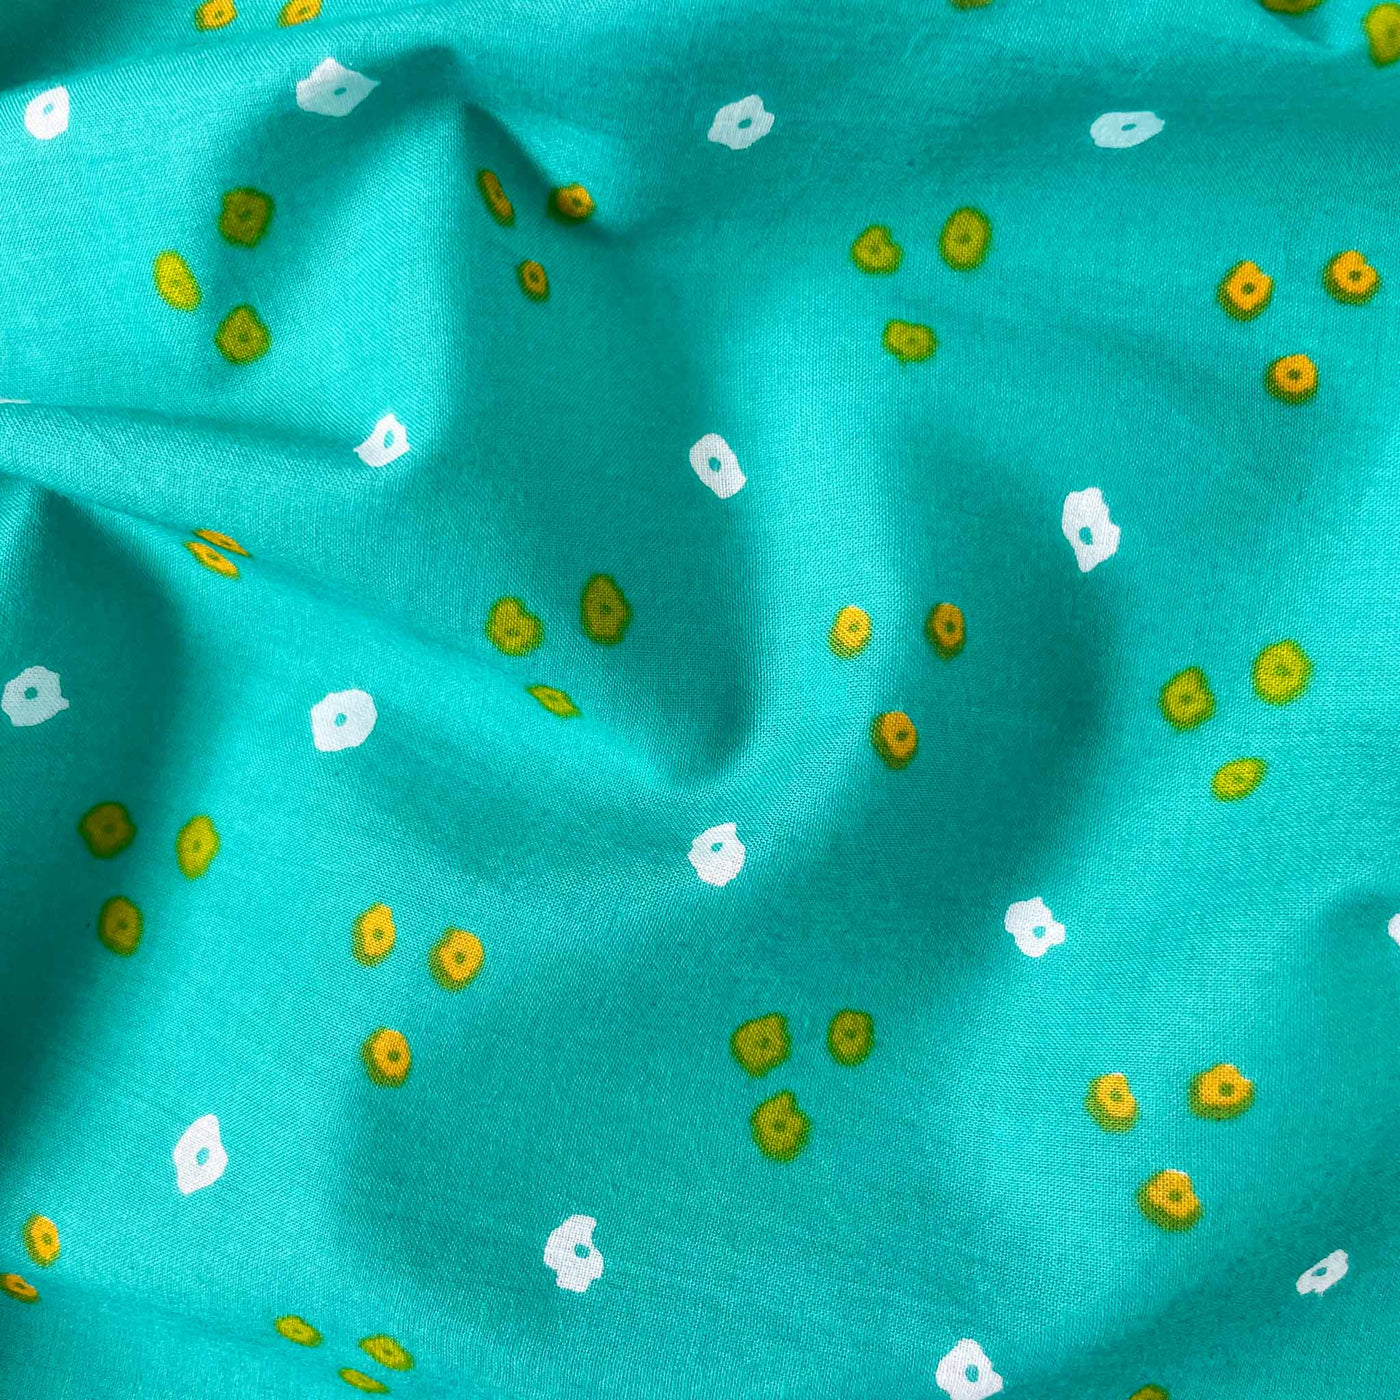 Fabric Pandit Cut Piece (CUT PIECE) Light Turquoise and Yellow Dots and Triangles Bandhani Pattern Hand Block Printed Pure Cotton Fabric Width (43 inches)